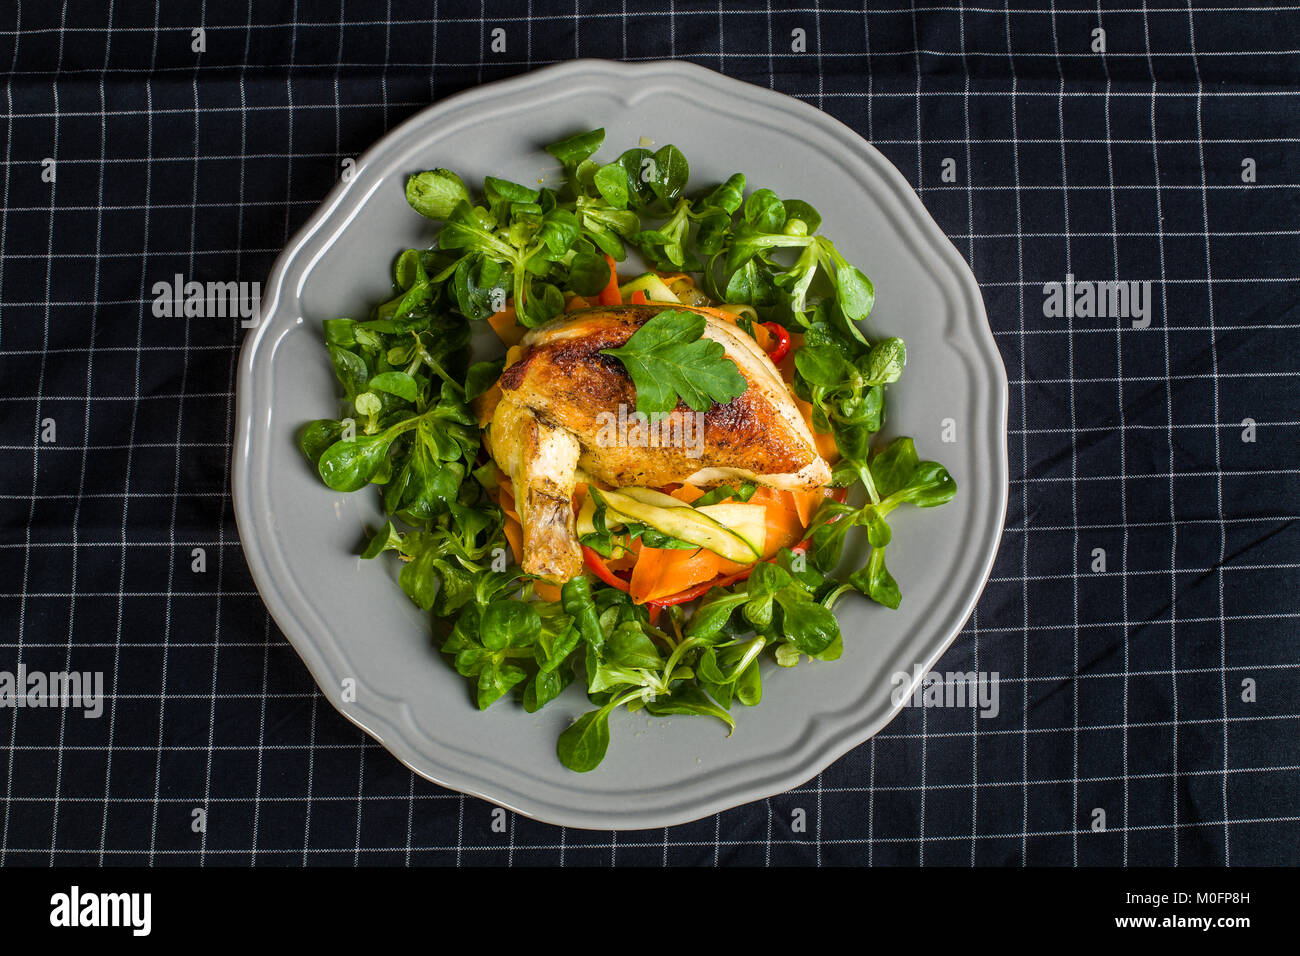 Chicken Supreme on vegetable pappardelle with corn salad Stock Photo